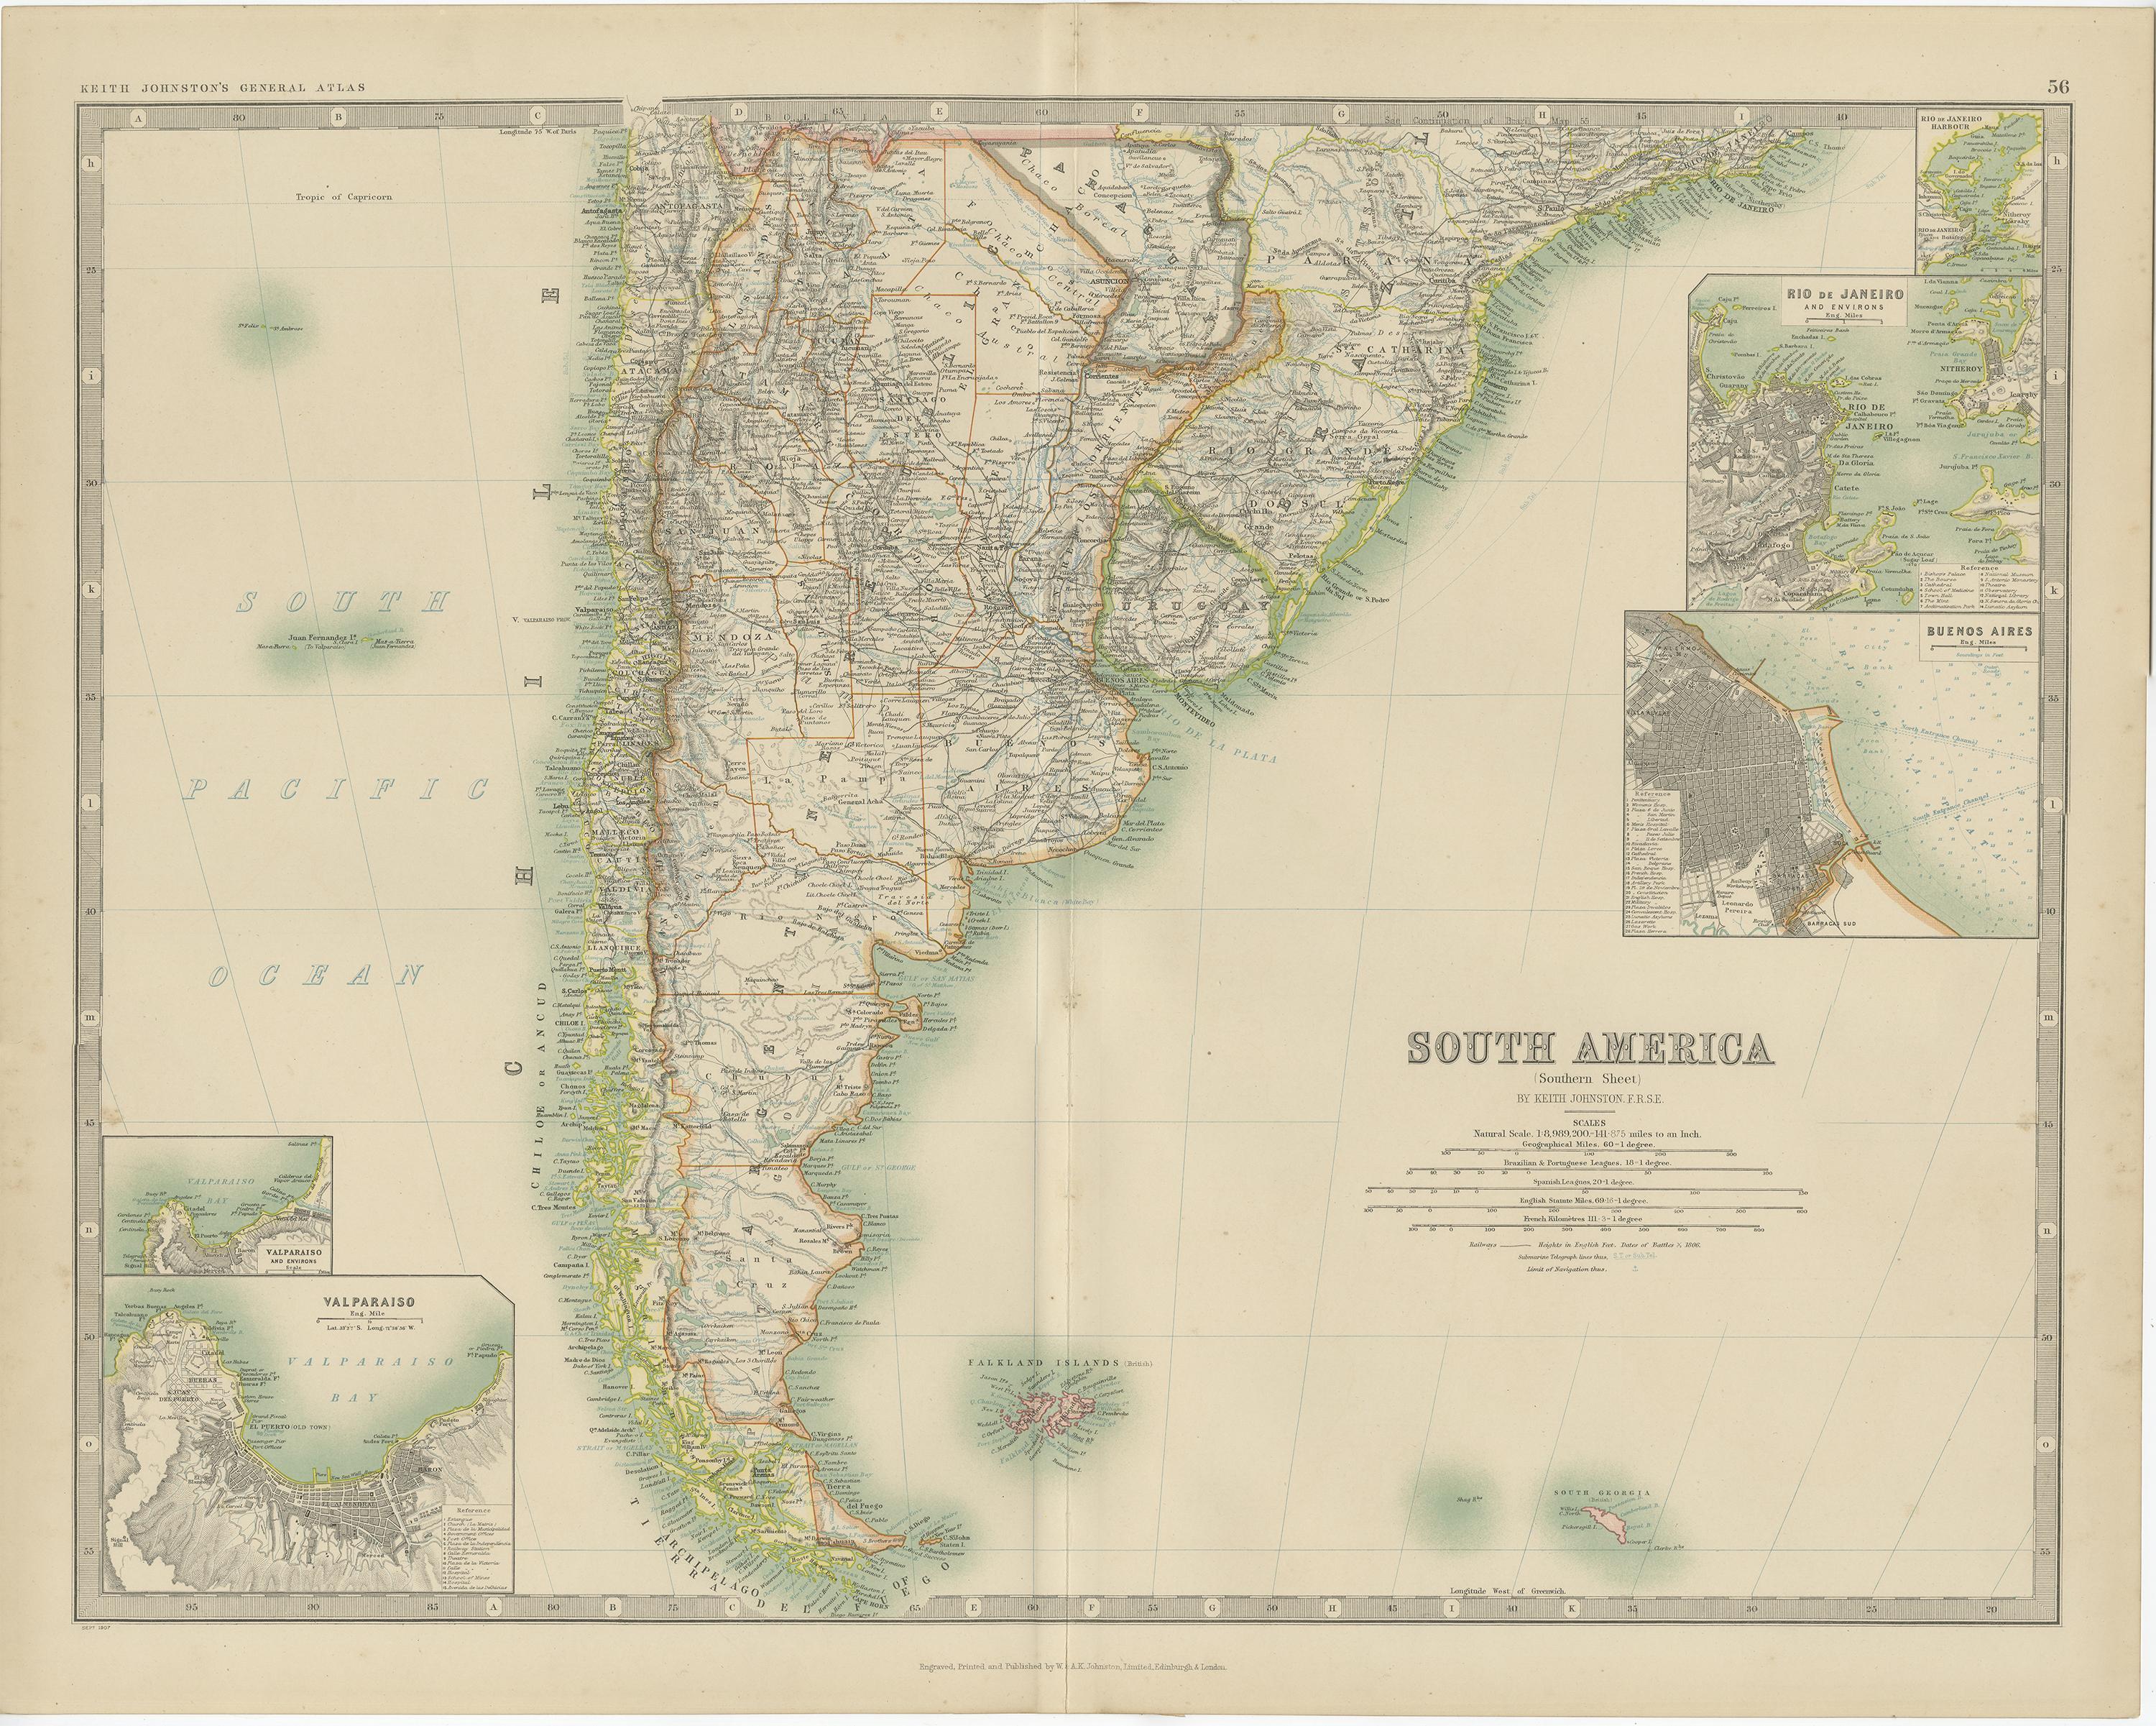 Antique map titled 'South America, Southern Sheet'. Depicting Chile, Argentina, Brazil, Patagonia, the Falkland Island and more. With inset maps of Valparaiso, Rio de Janeiro and Buenos Aires. This map originates from the ‘Royal Atlas of Modern